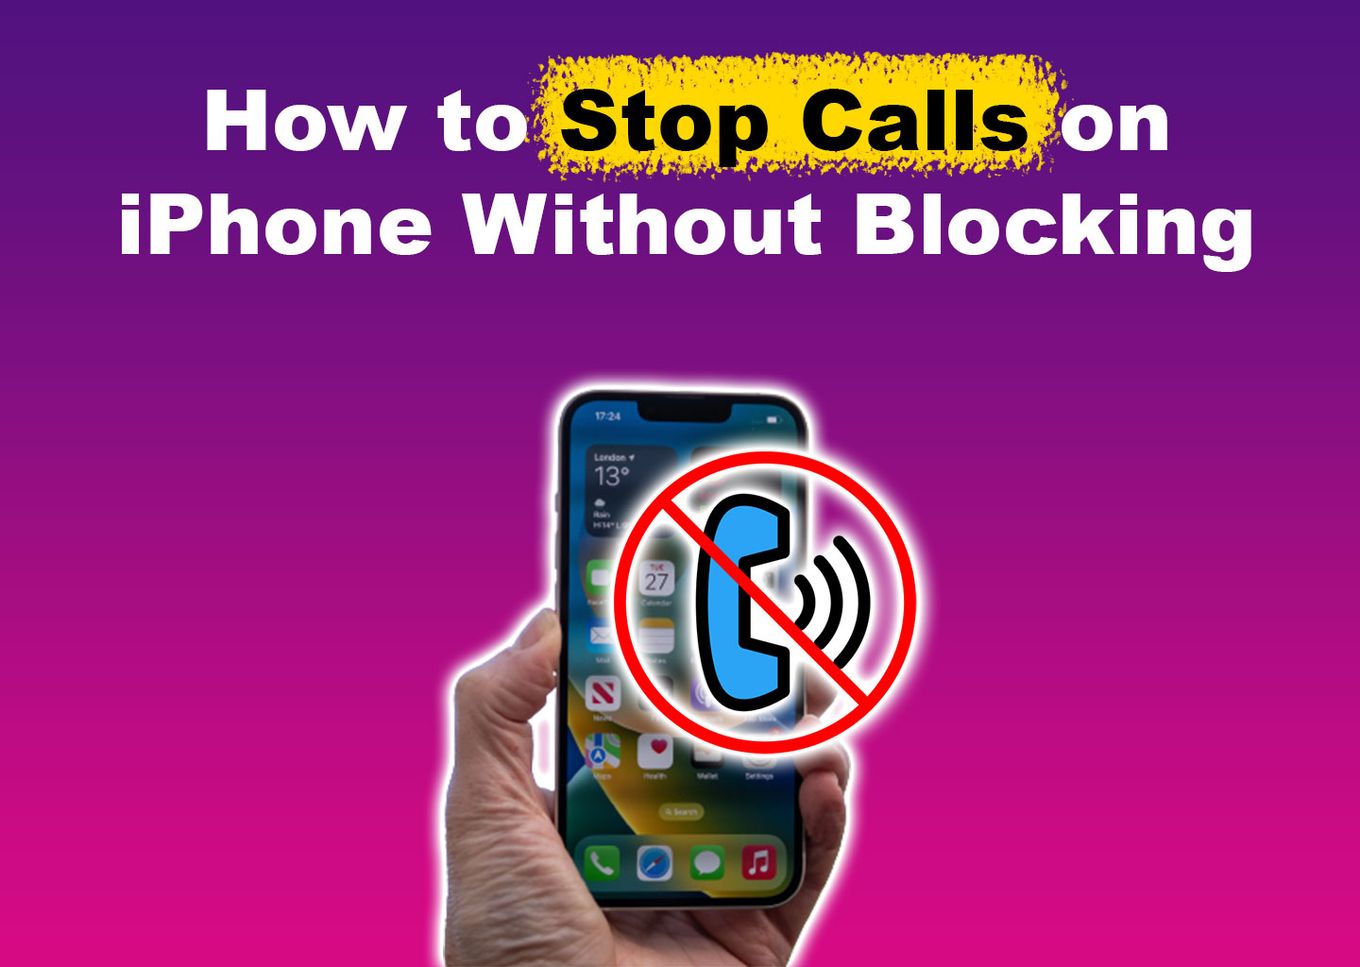 How to Stop Calls on iPhone Without Blocking